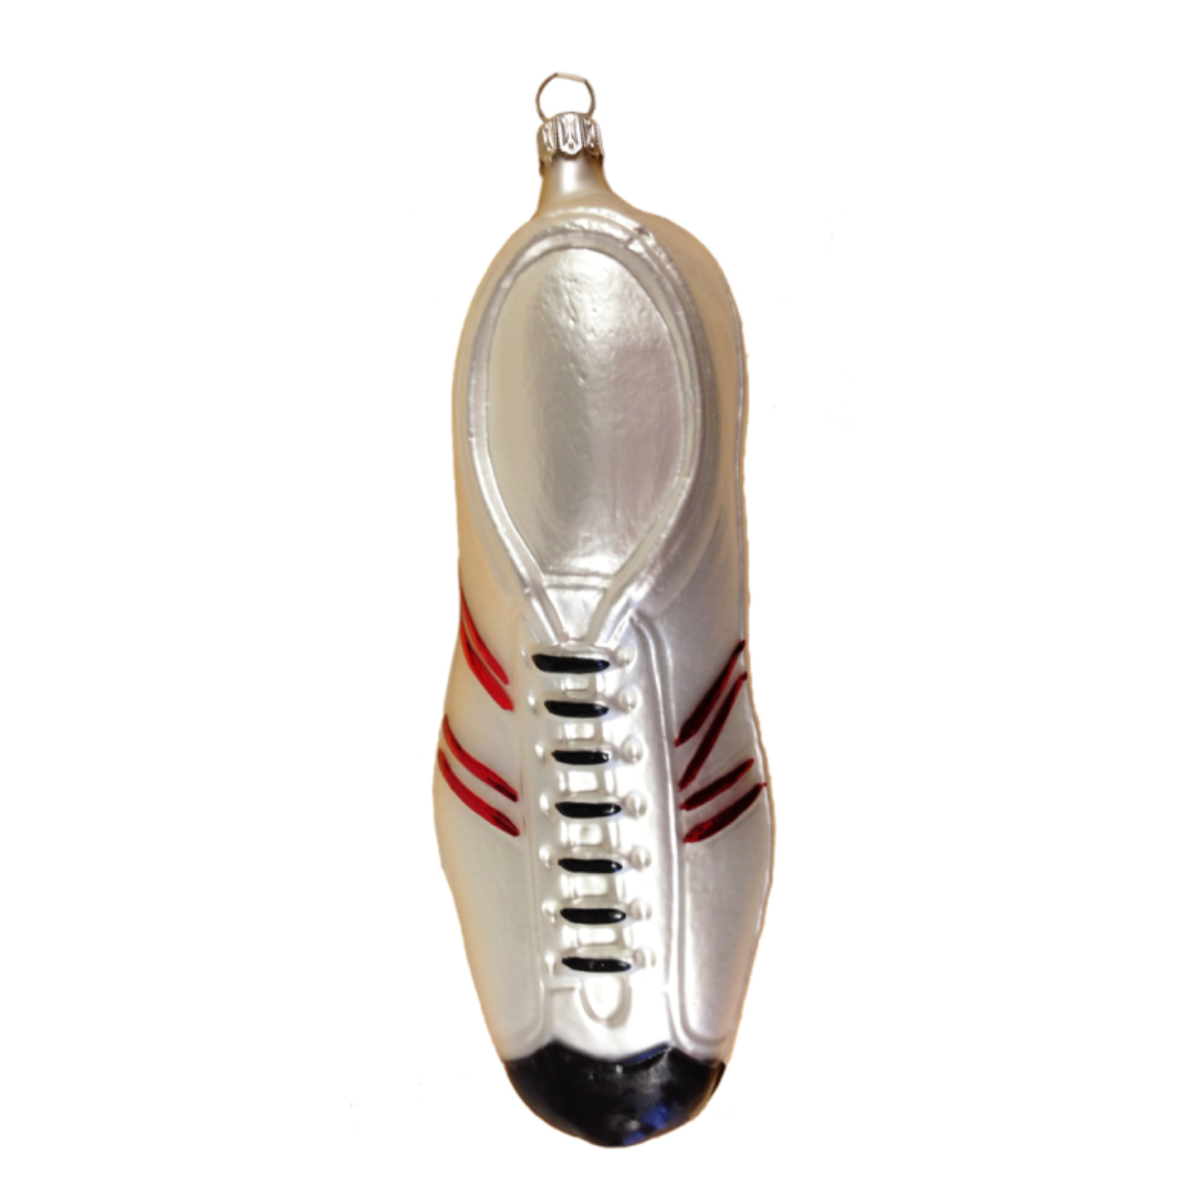 Running Sneaker Ornament by Old German Christmas